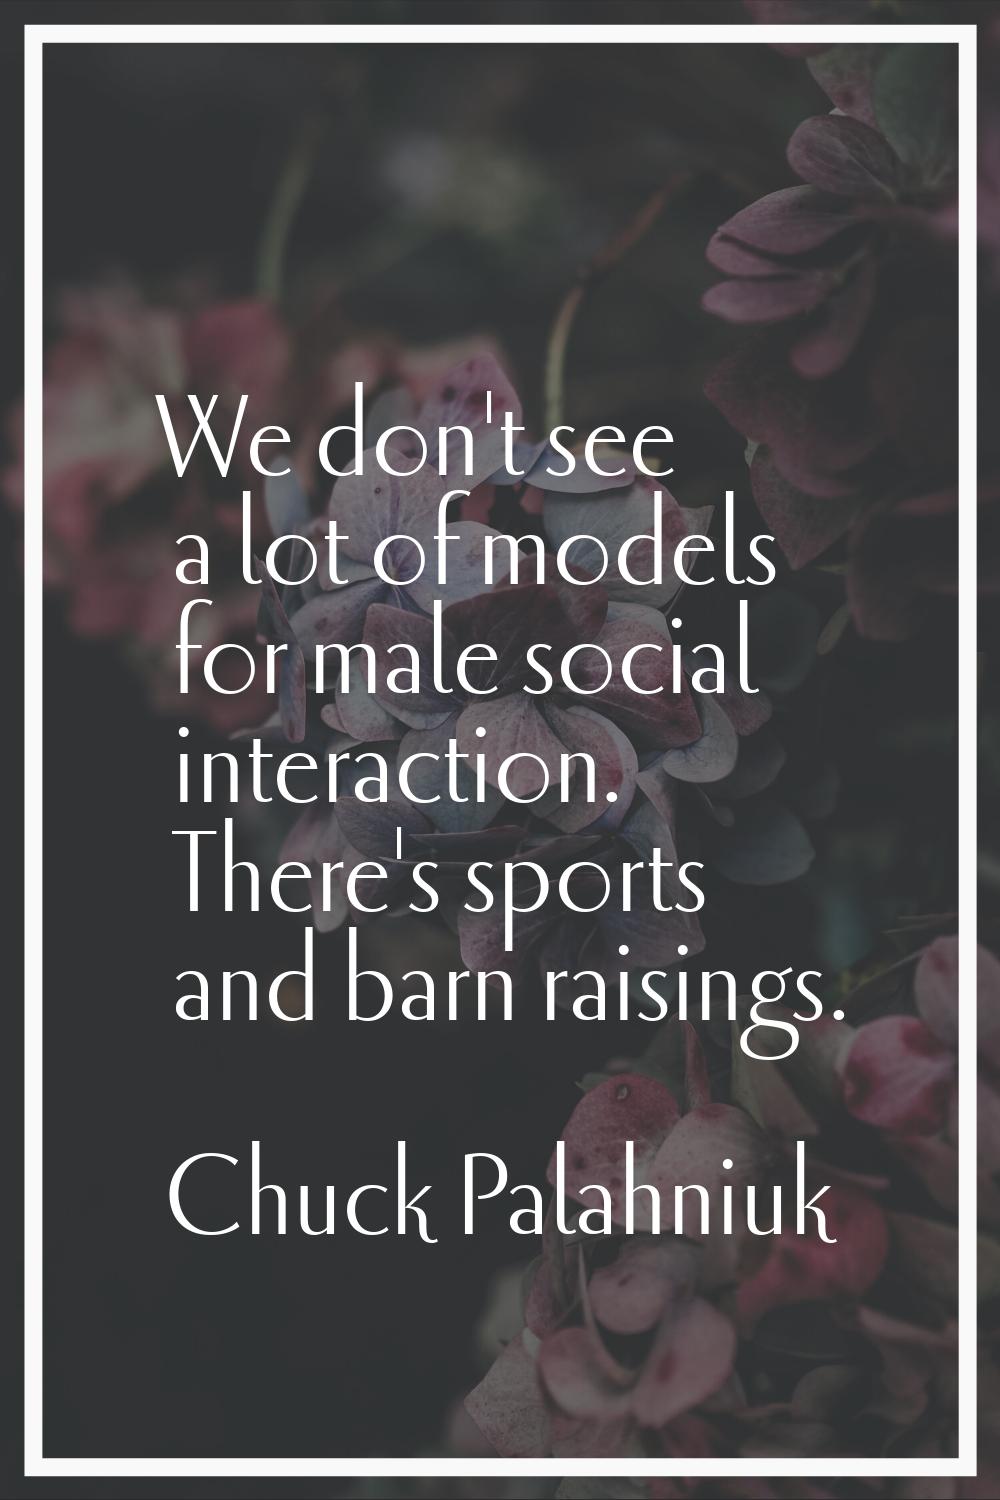 We don't see a lot of models for male social interaction. There's sports and barn raisings.